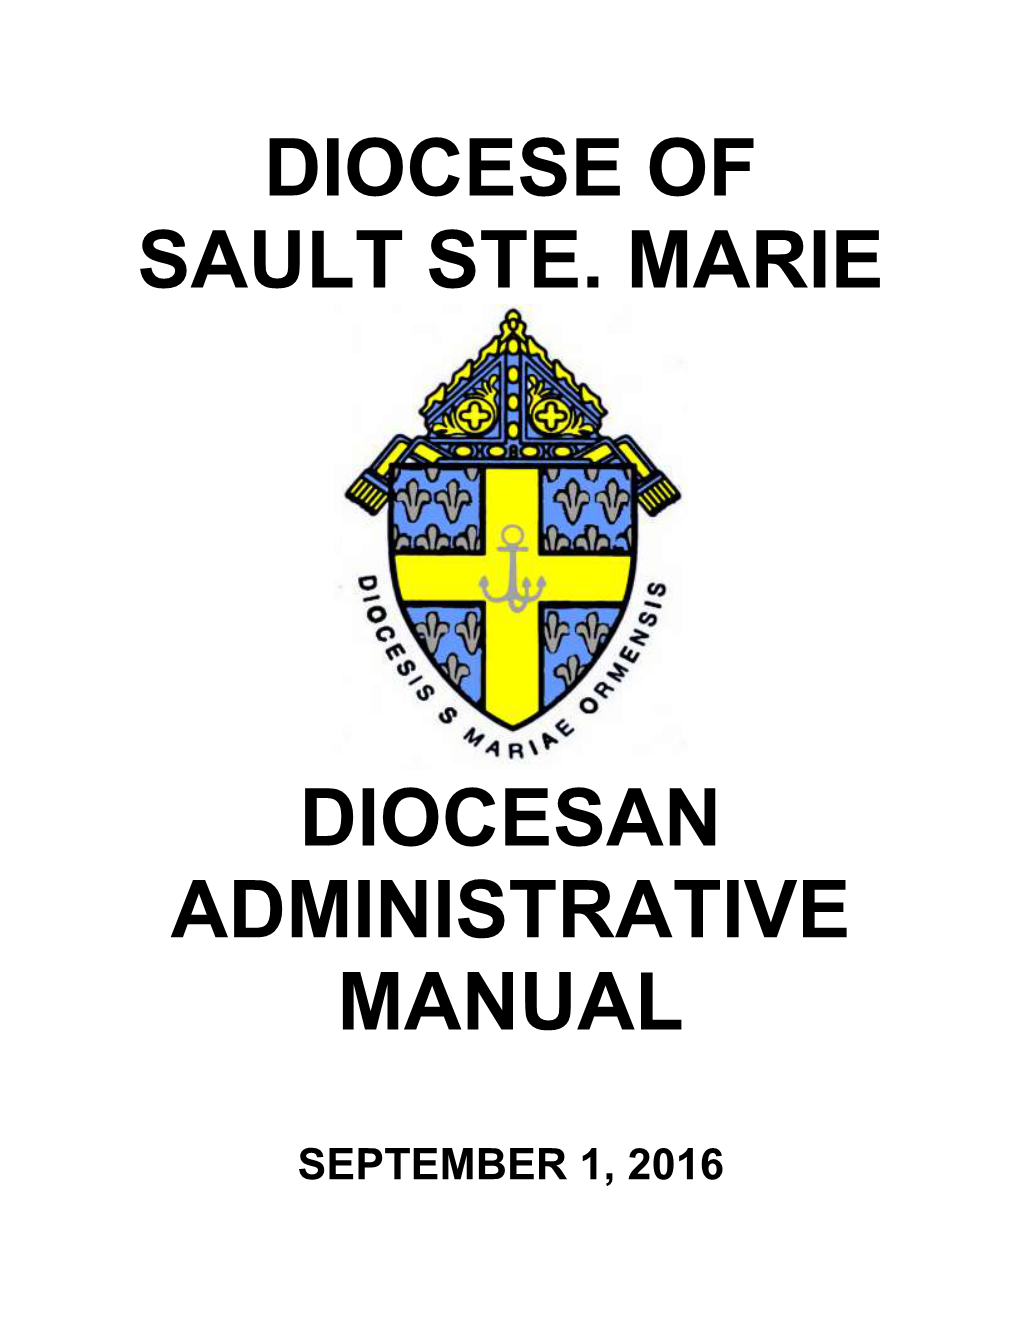 Diocese of Sault Ste. Marie Diocesan Administrative